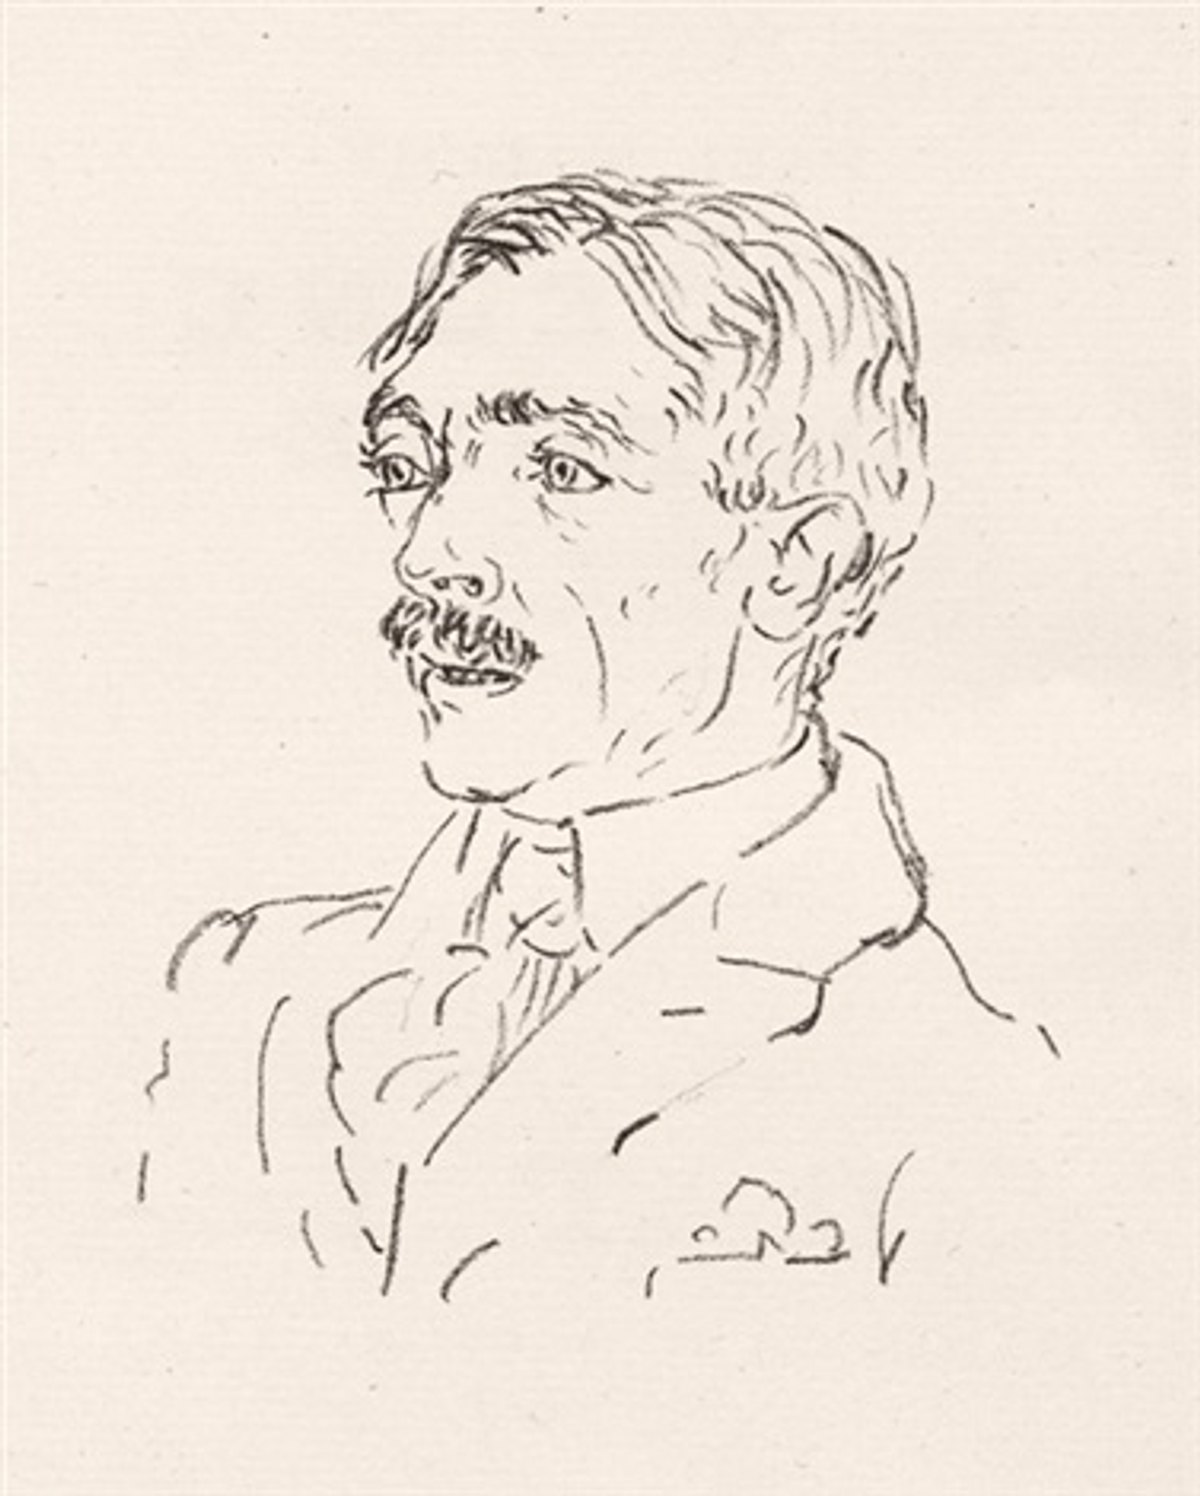 Valéry’s portrait, by Picasso, which appears in the second edition of The Young Fate.